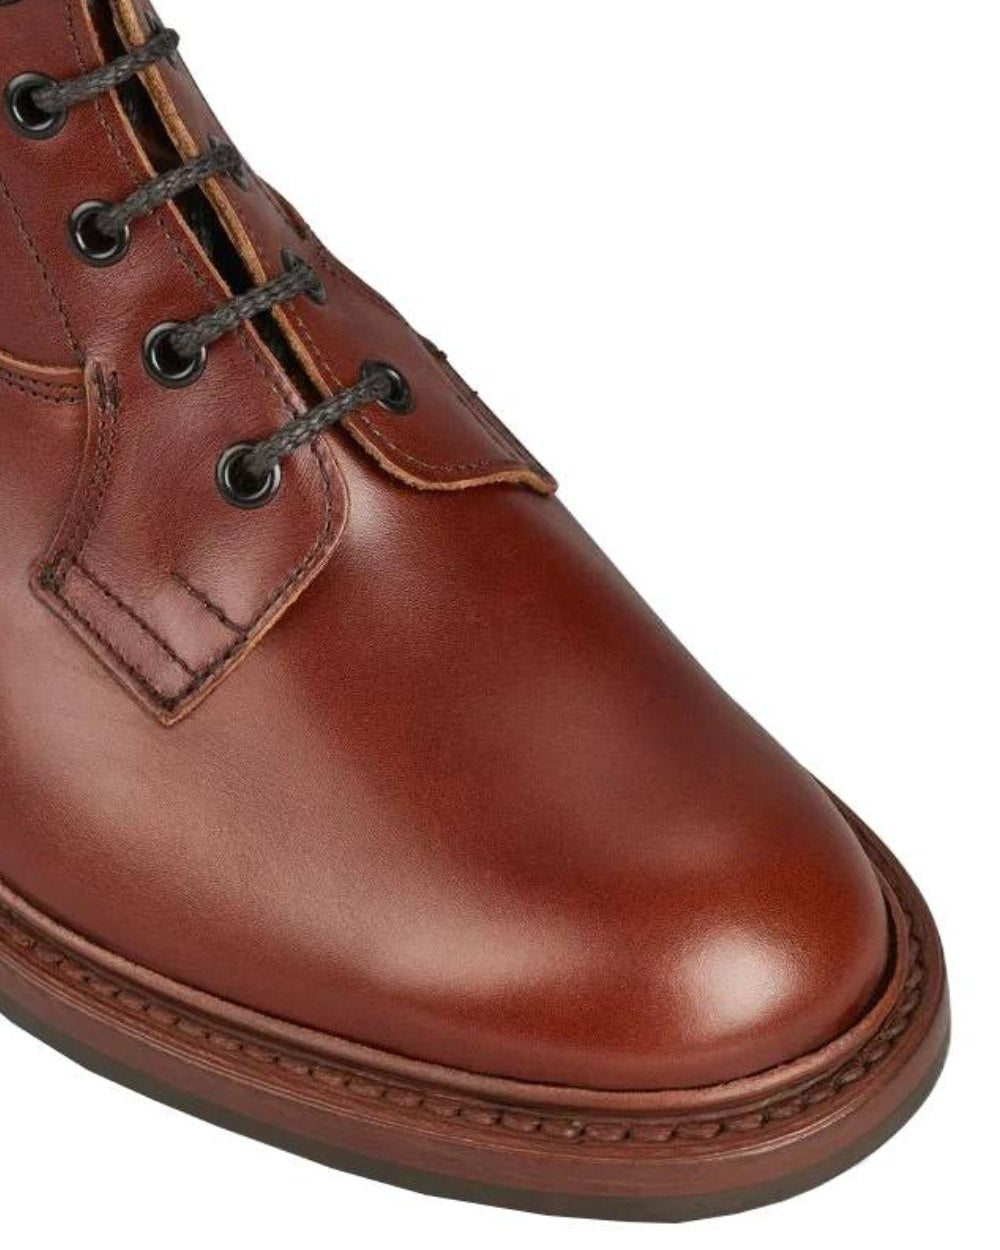 Marron Antique Coloured Trickers Burford Country Boot Dainite Sole On A White Background 